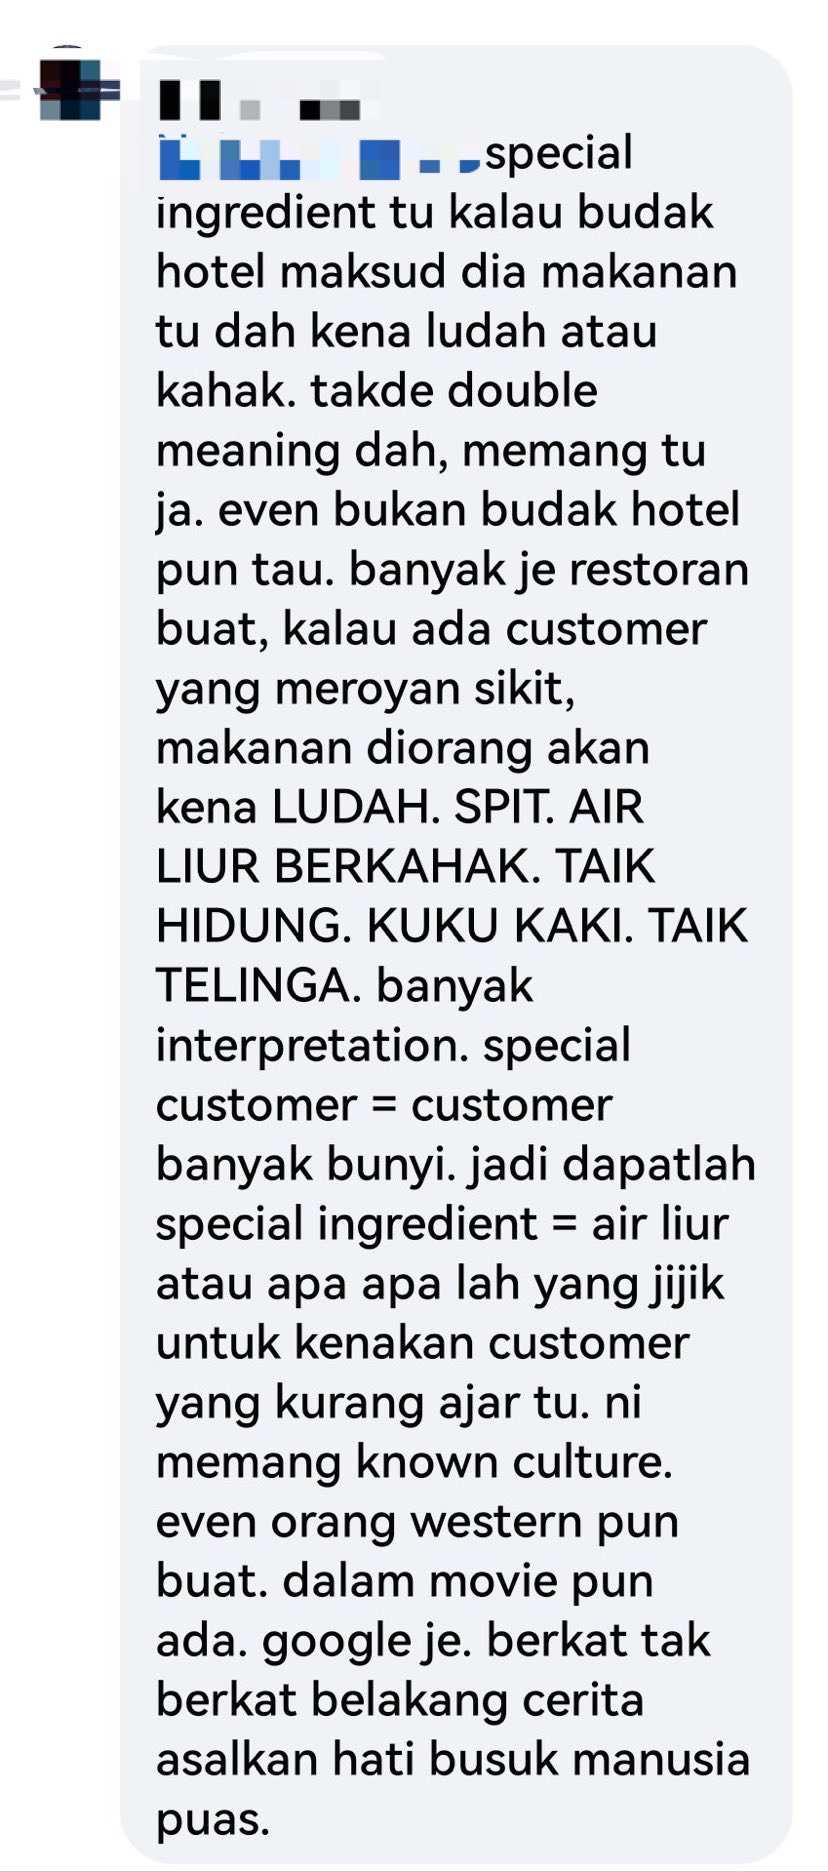 M'sian restaurant claims to have put 'special ingredients' into customers' food after tiktoker leaves negative review | weirdkaya